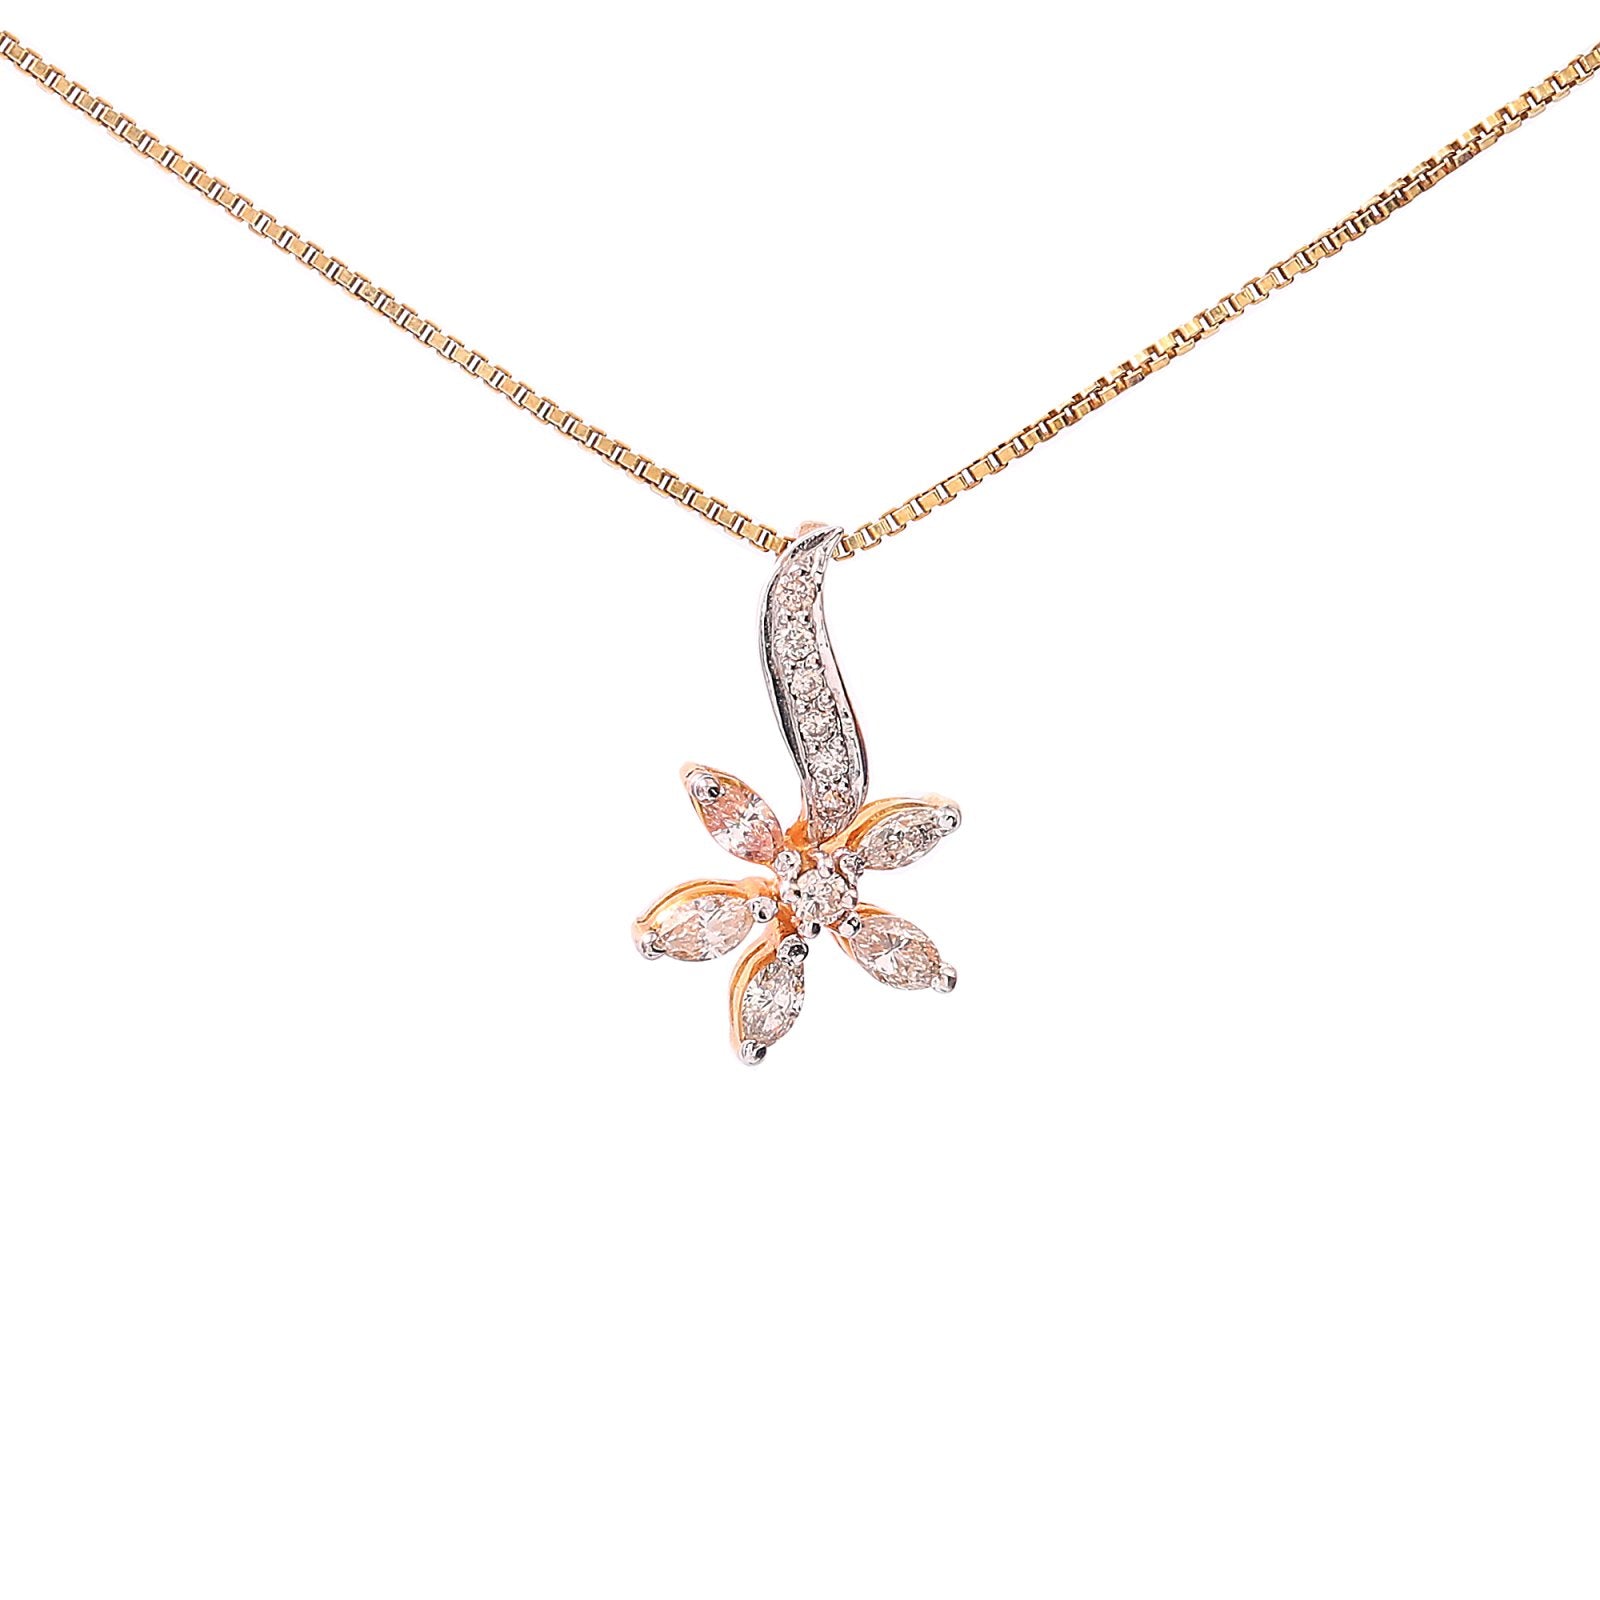 Yellow Gold Flower Pendent setting 7 Round diamonds and 5 Marquise TDW: 0.45ct VSGH 14k